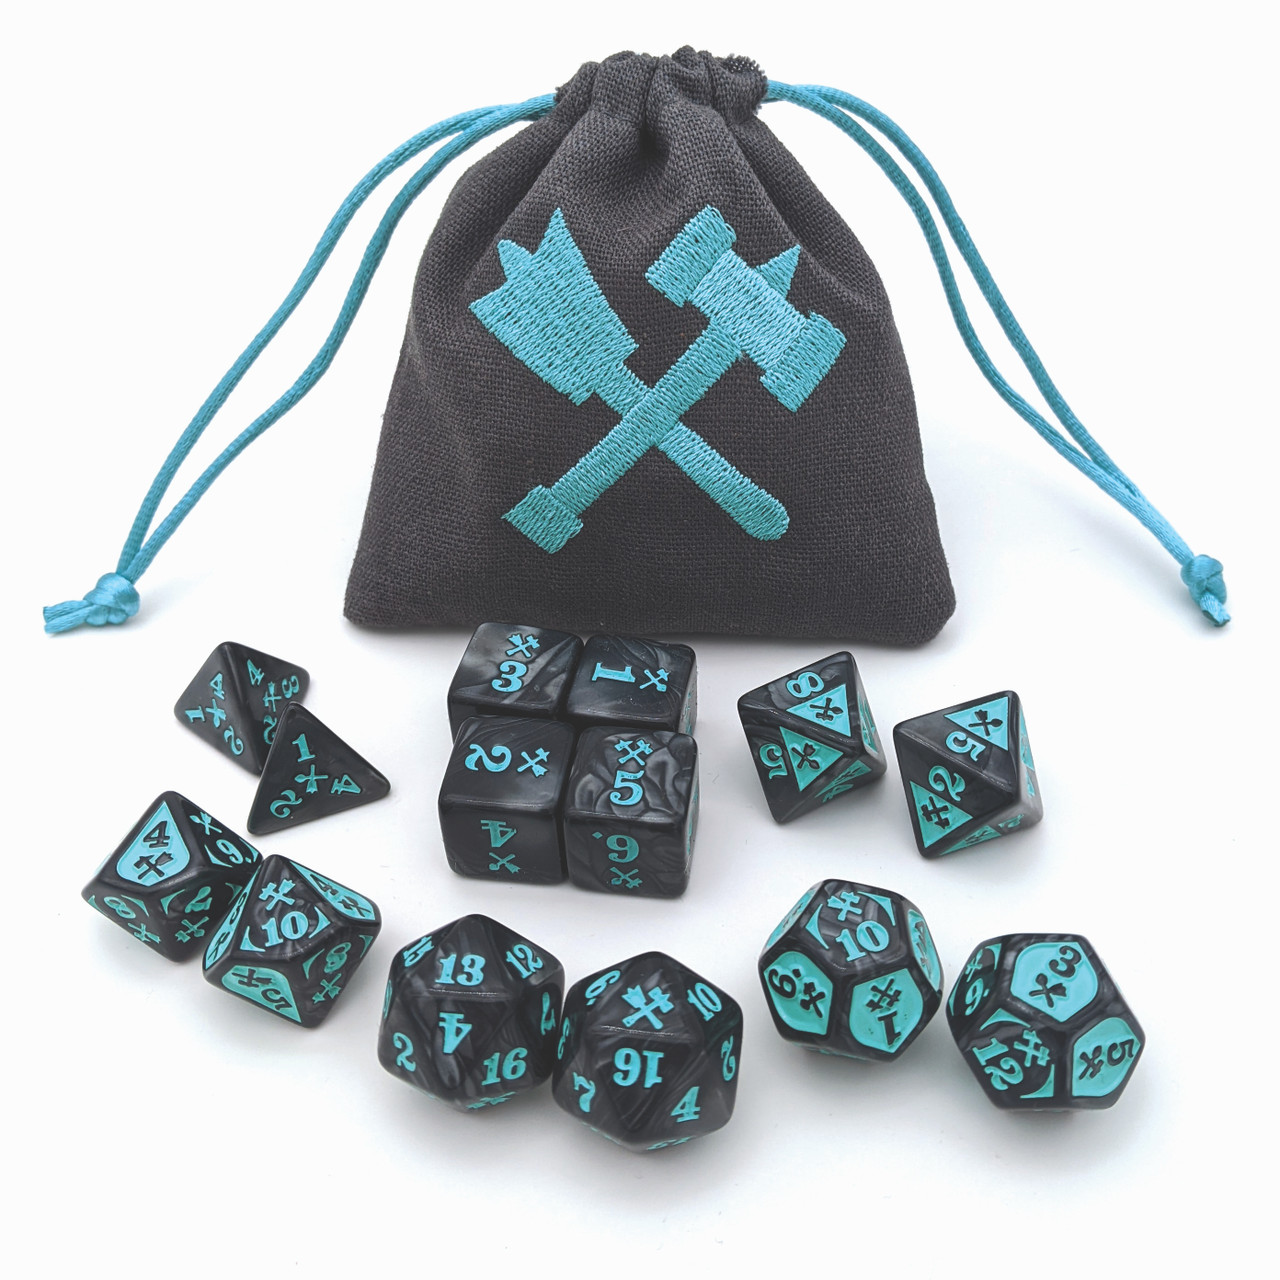 Dice and Gaming Accessories Other Gaming Accessories: Acrylic 